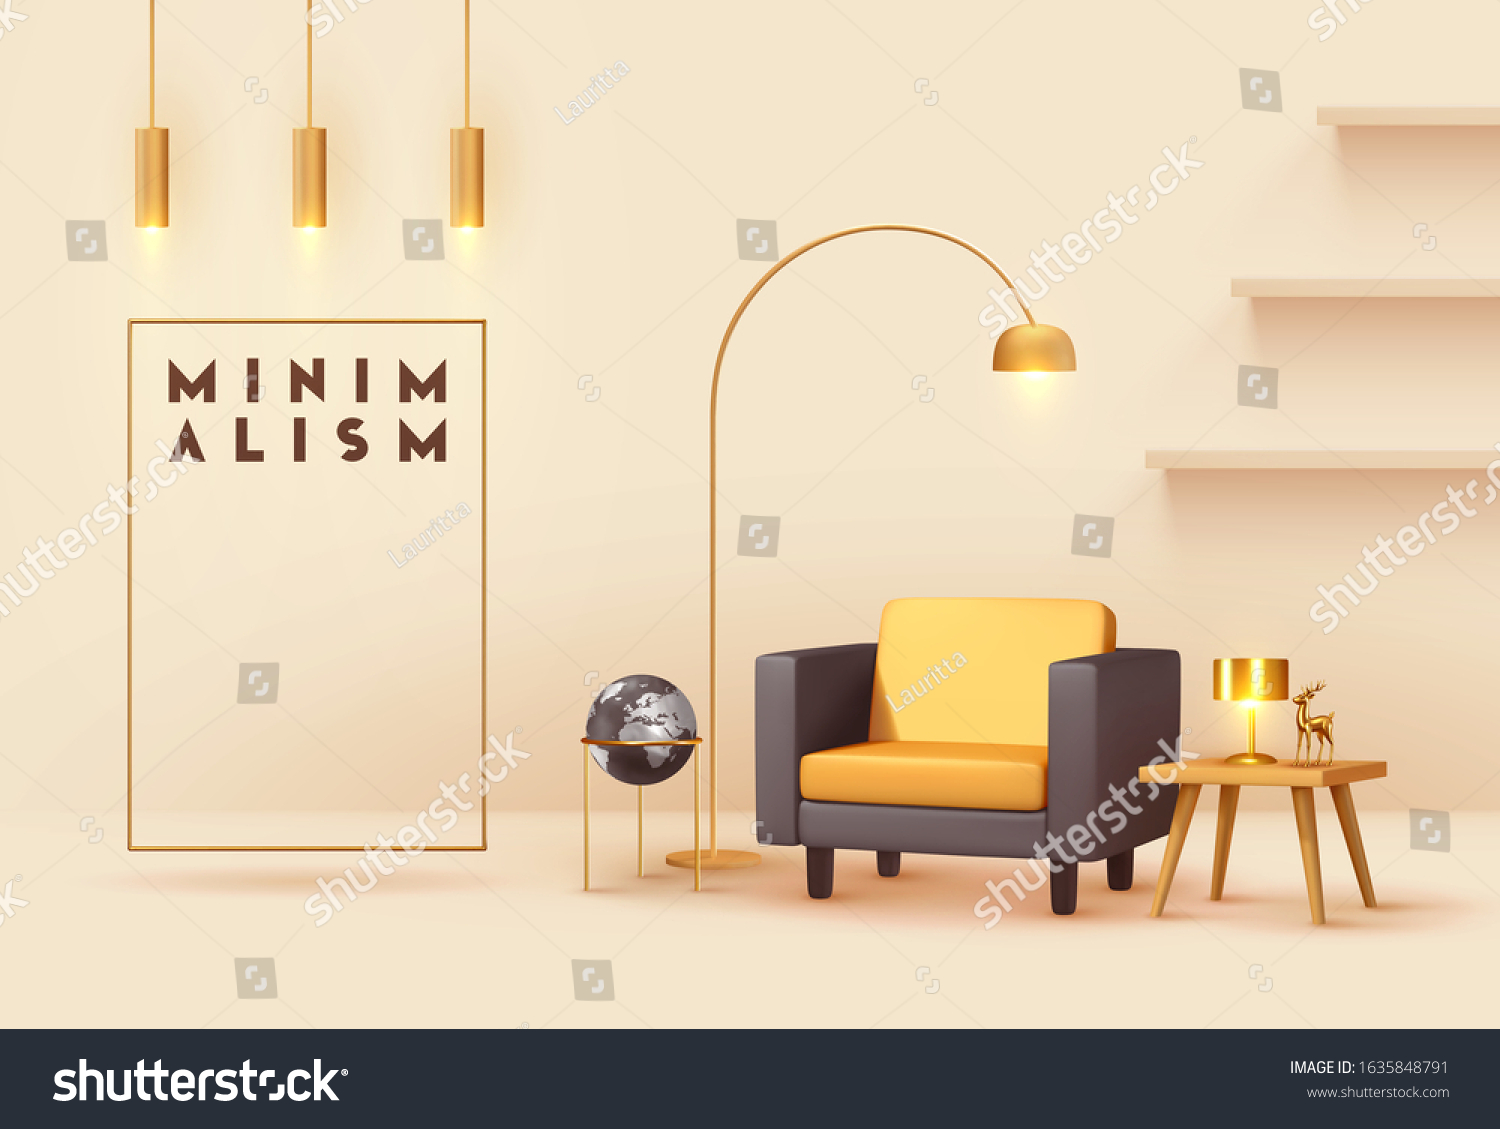 Interior design living room. Realistic wooden square table with gold lamp. Armchair yellow and black fabric. Hanging Golden Lamps. shelf on wall. Minimal composition 3d rendering. Vector illustration. #1635848791